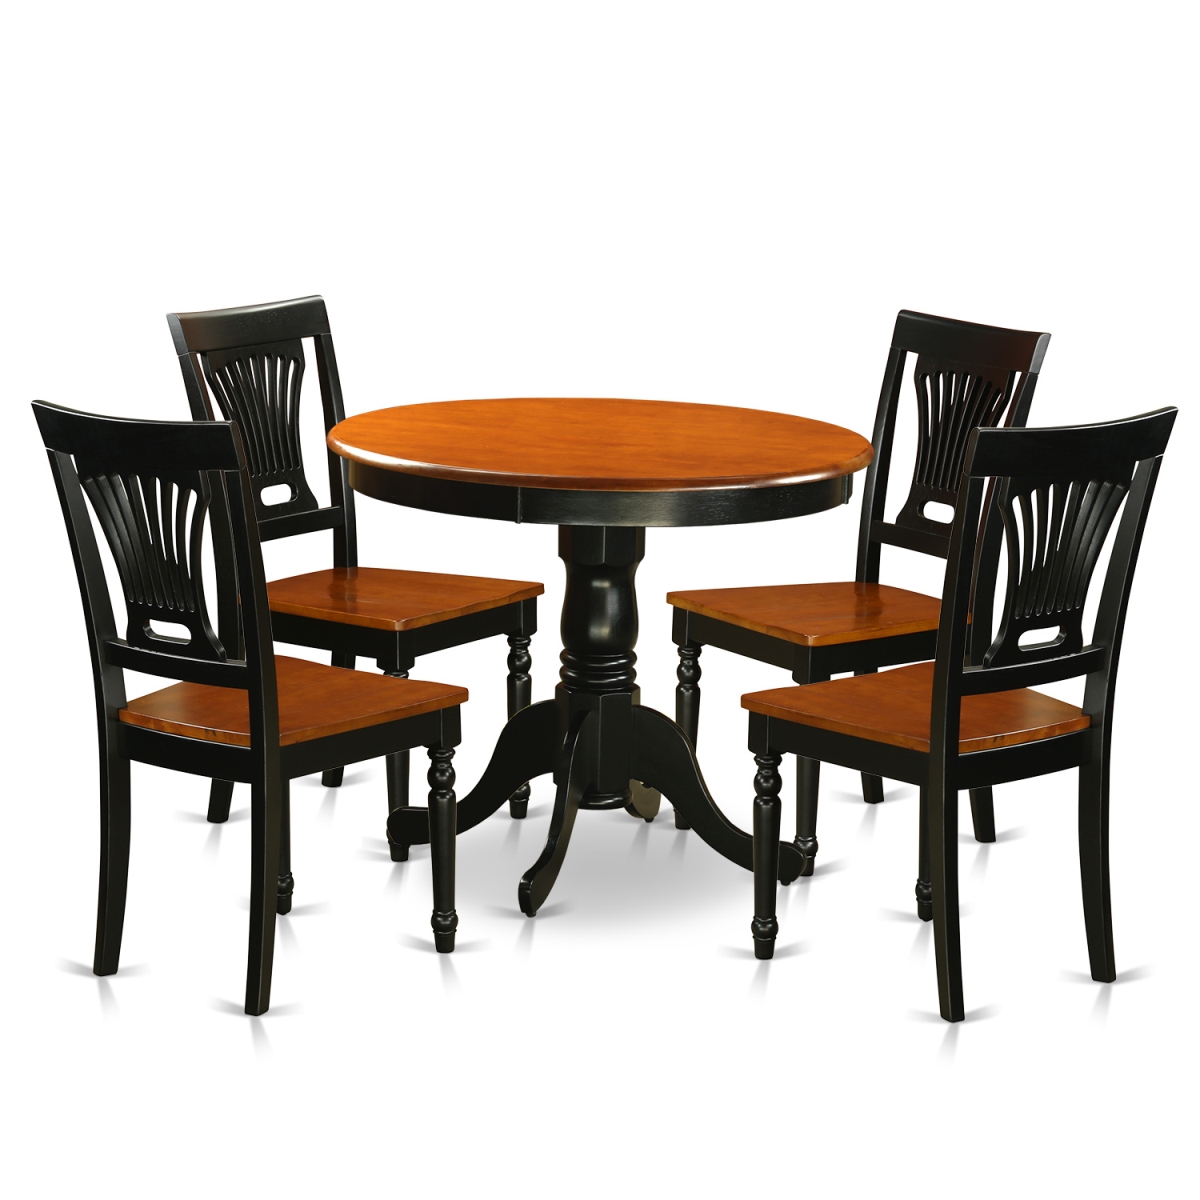 Picture of East West Furniture ANPL5-BLK-W Wood Seat Dining Set with 4 Chairs, Black & Cherry - 5 Piece